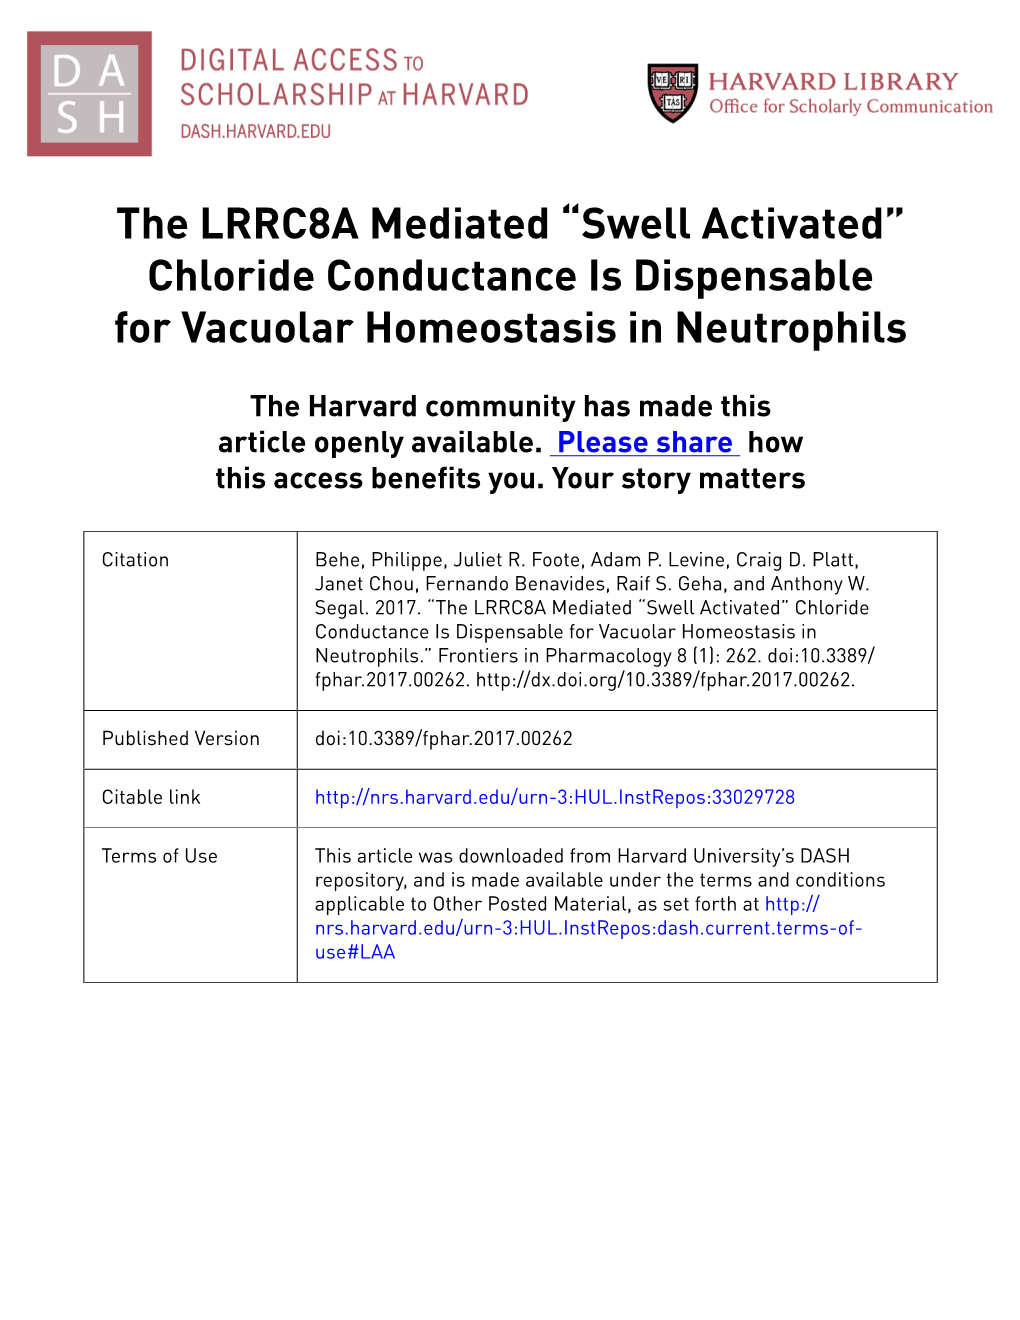 The LRRC8A Mediated “Swell Activated” Chloride Conductance Is Dispensable for Vacuolar Homeostasis in Neutrophils